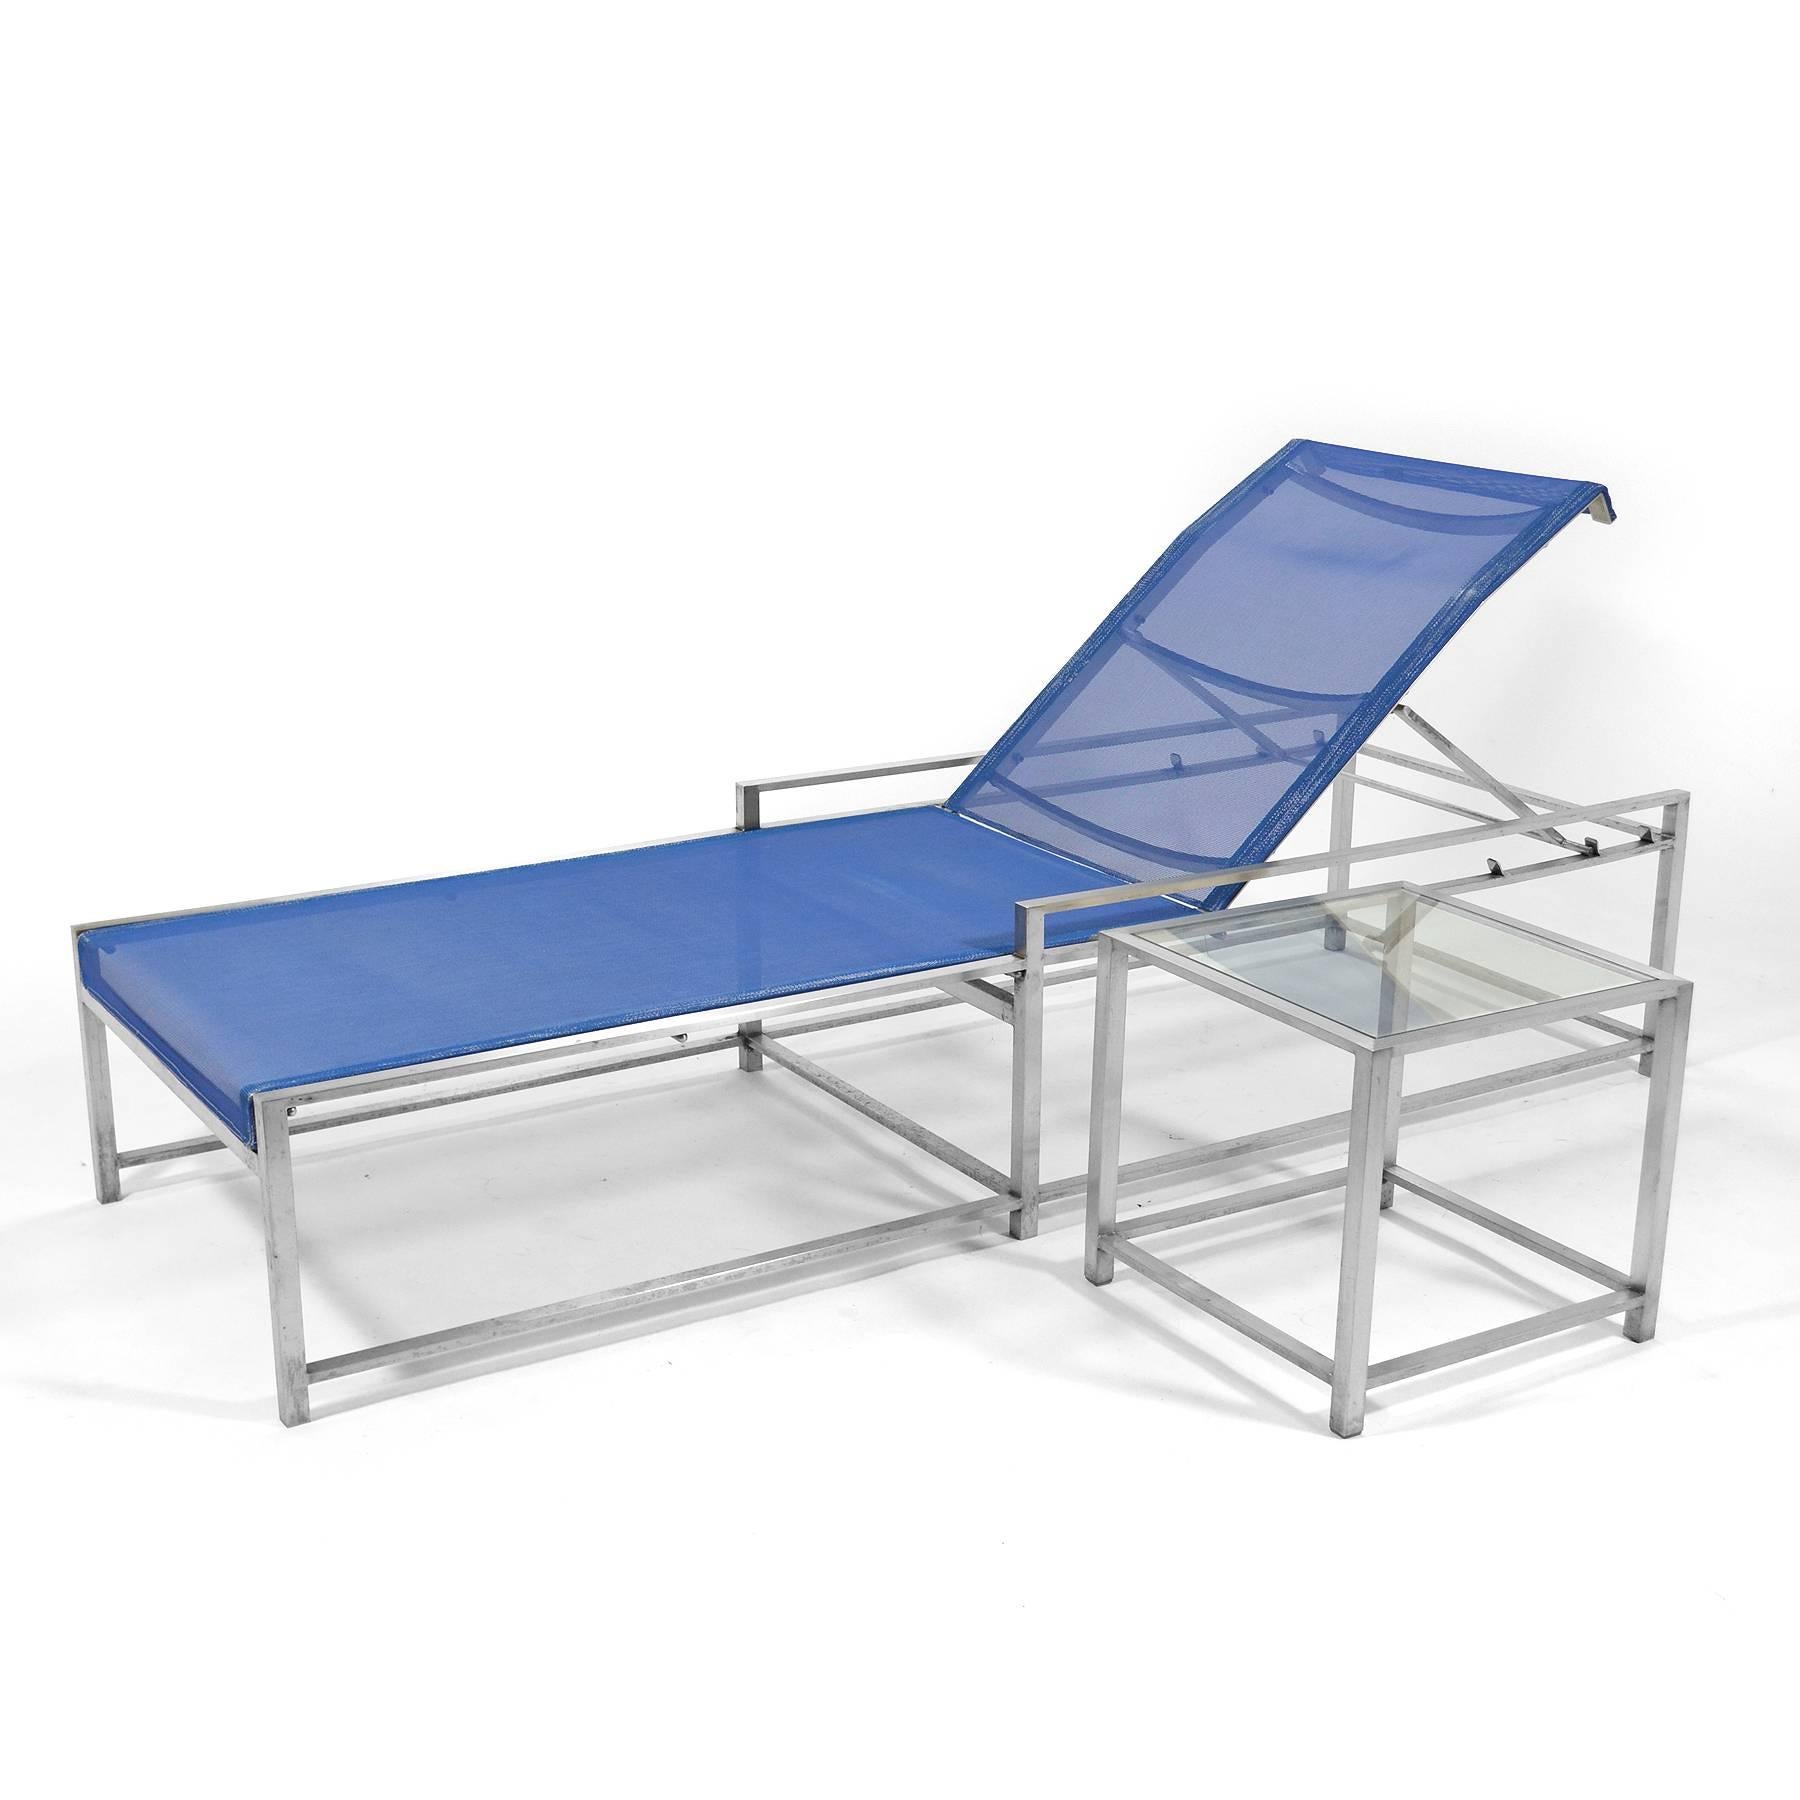 Modern Richard Frinier Pair of NXT Chaise Lounges by Brown Jordan For Sale